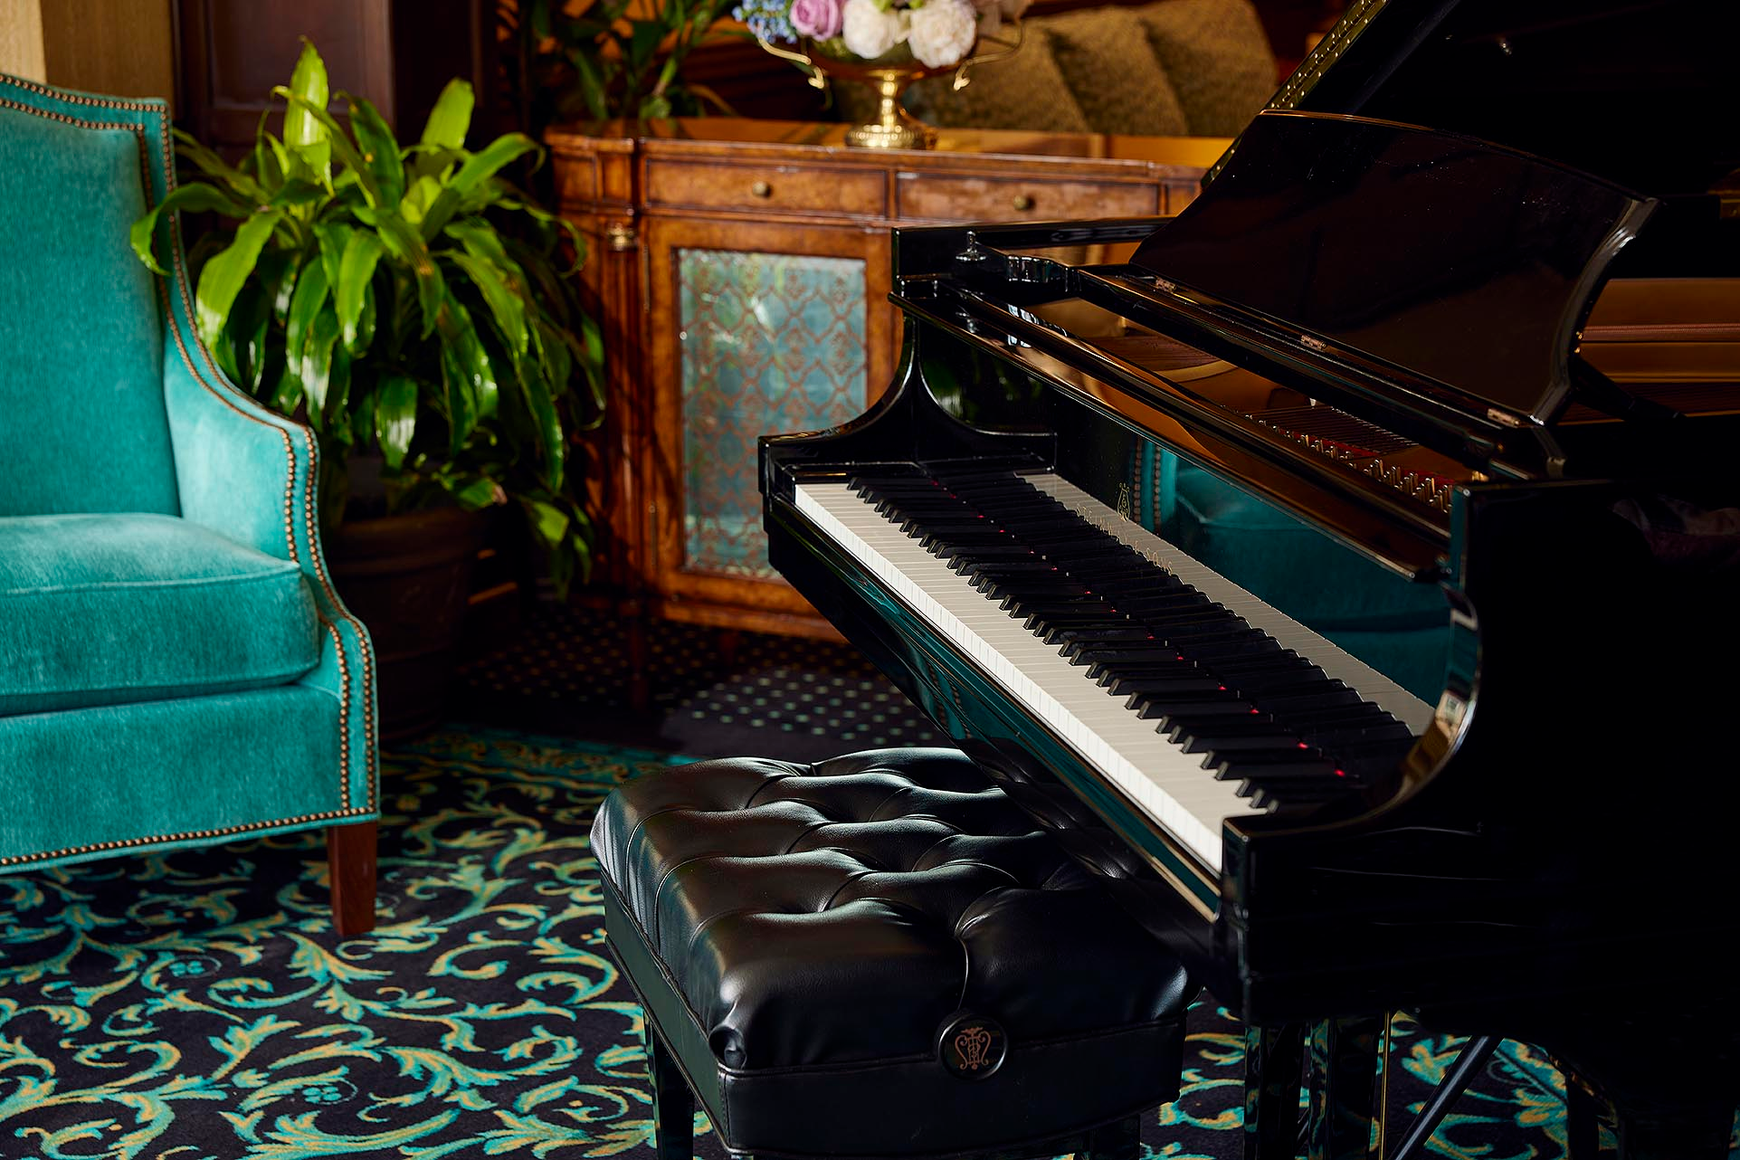 A spot to gather in the lobby to play show tunes on the baby grand